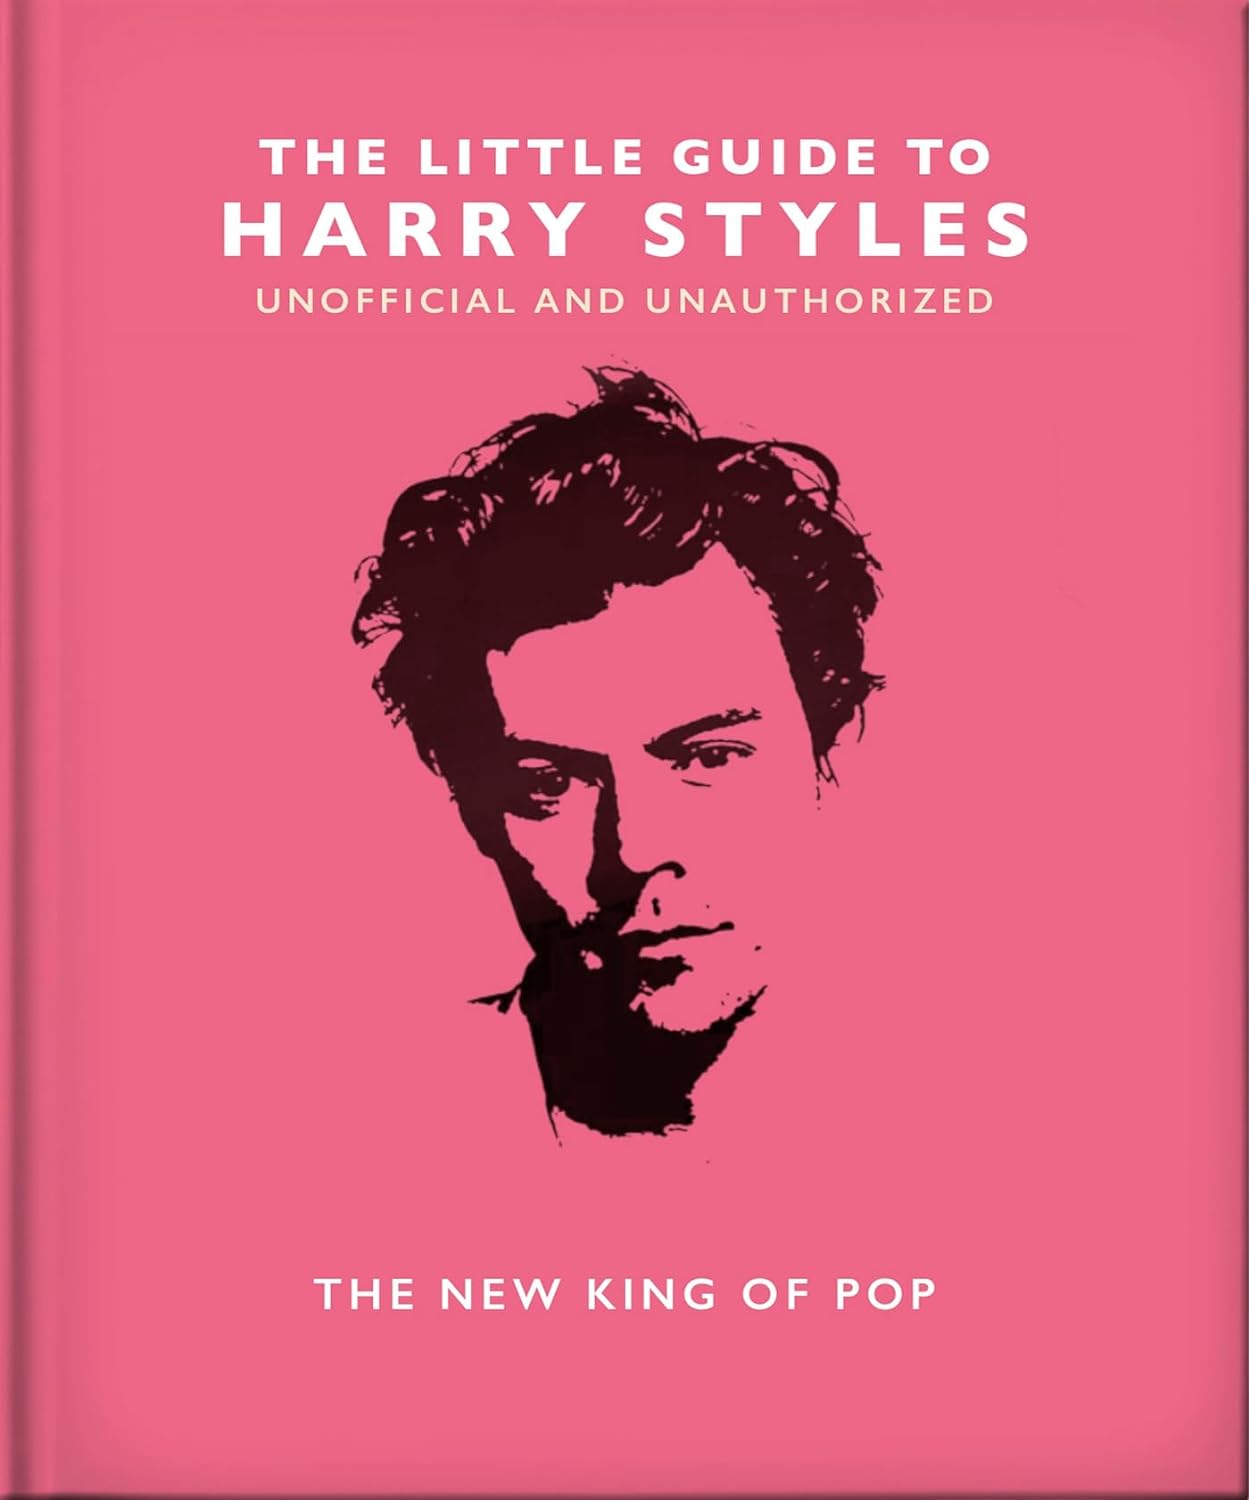 Book - The Little Guide to Harry Styles: The New King of Pop-hotRAGS.com